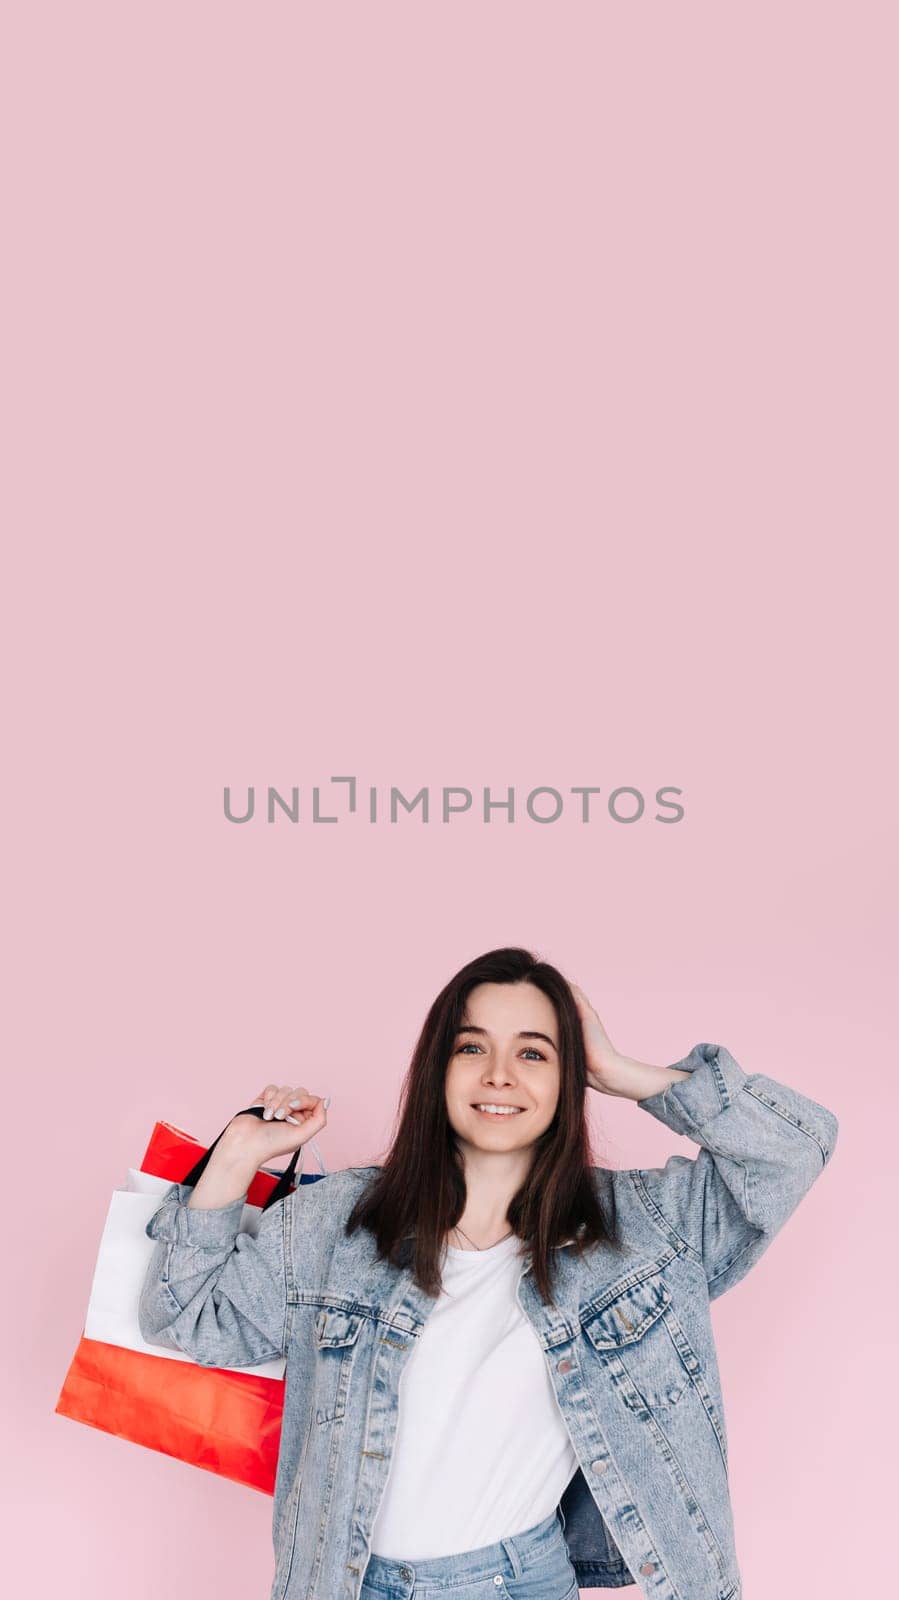 Excited young woman in casual denim shirt raises her arm in celebration, standing in front of a pink background, happy after shopping or finding a great deal online. Vertical photography